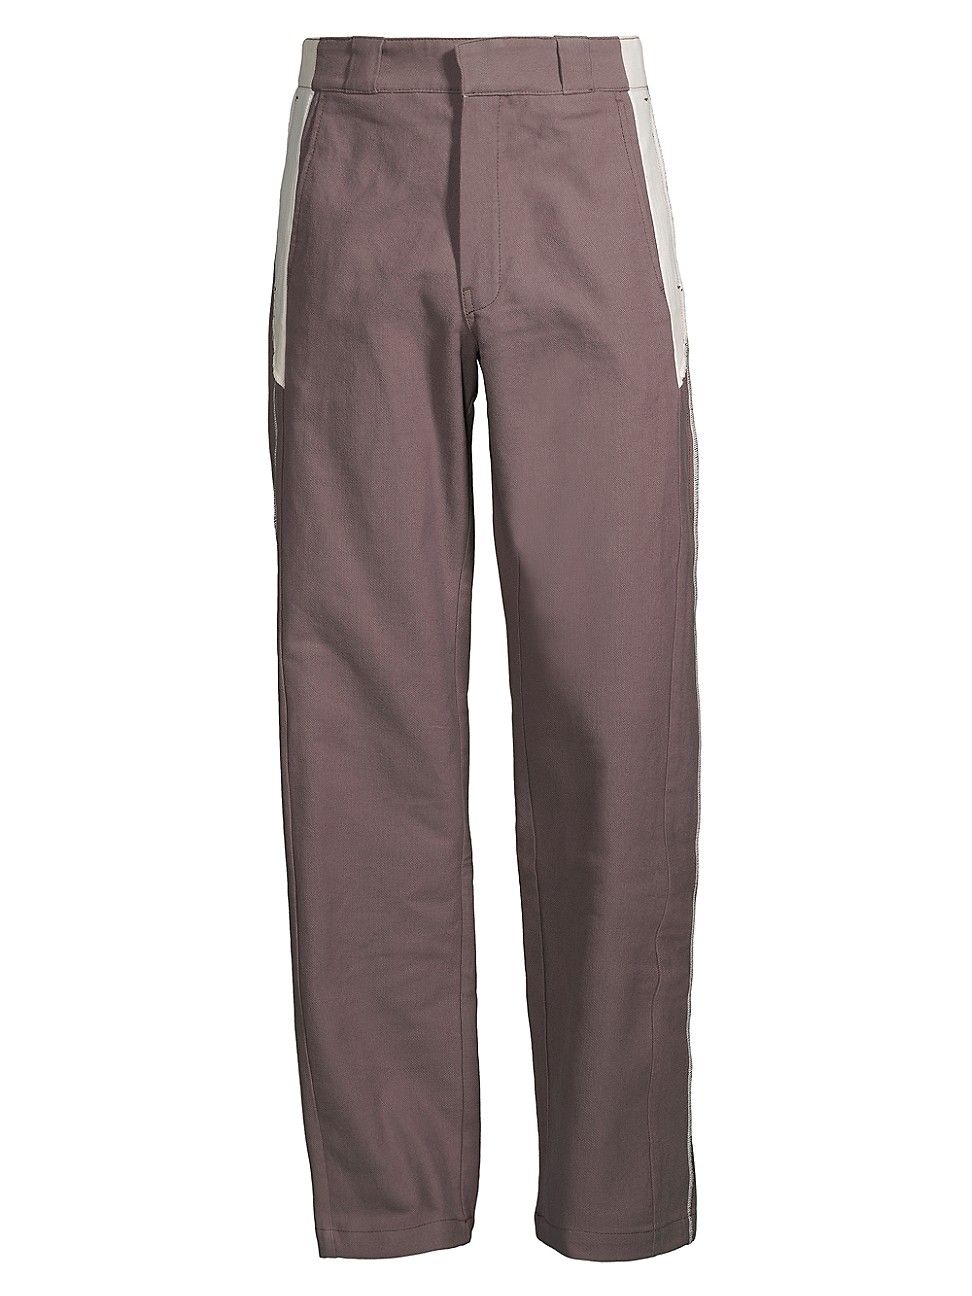 Men's Inside Out Chino Pants